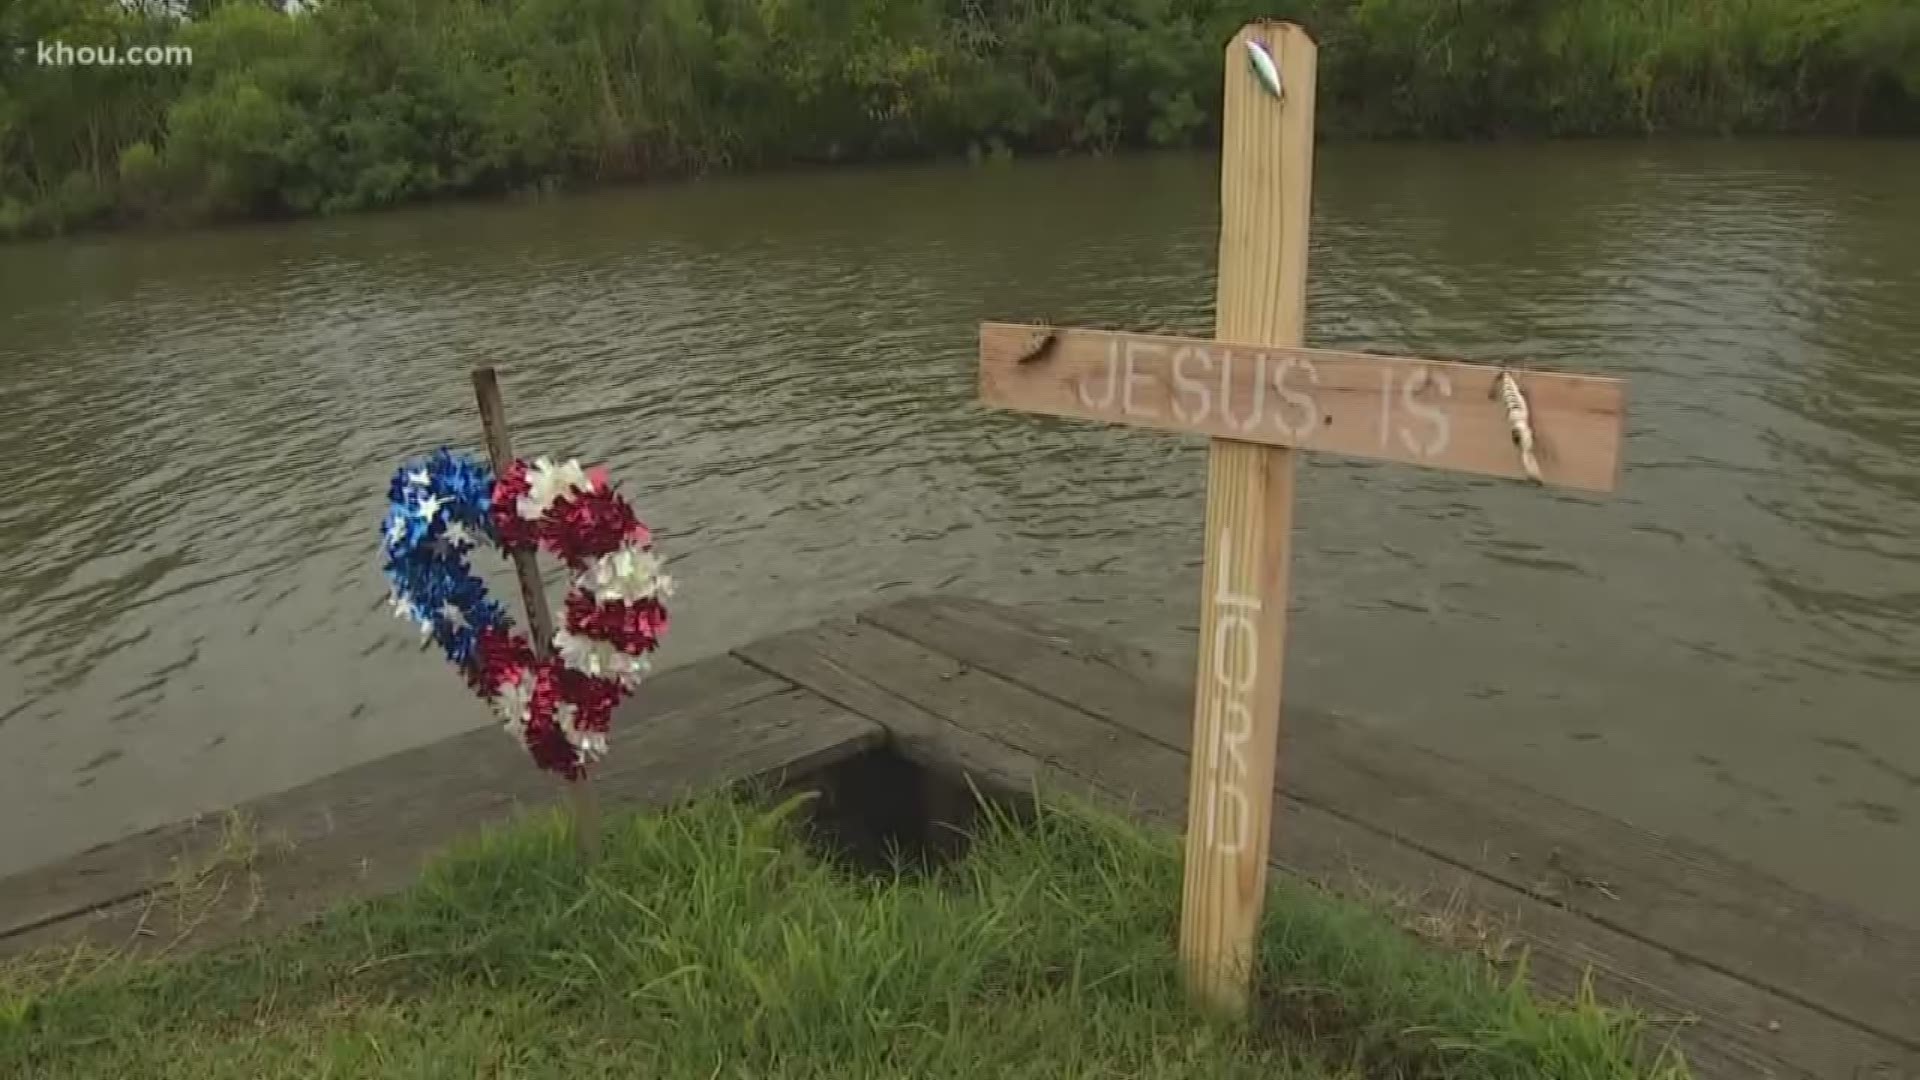 Three people died in a boat crash in Baytown over the weekend and one man has been charged.